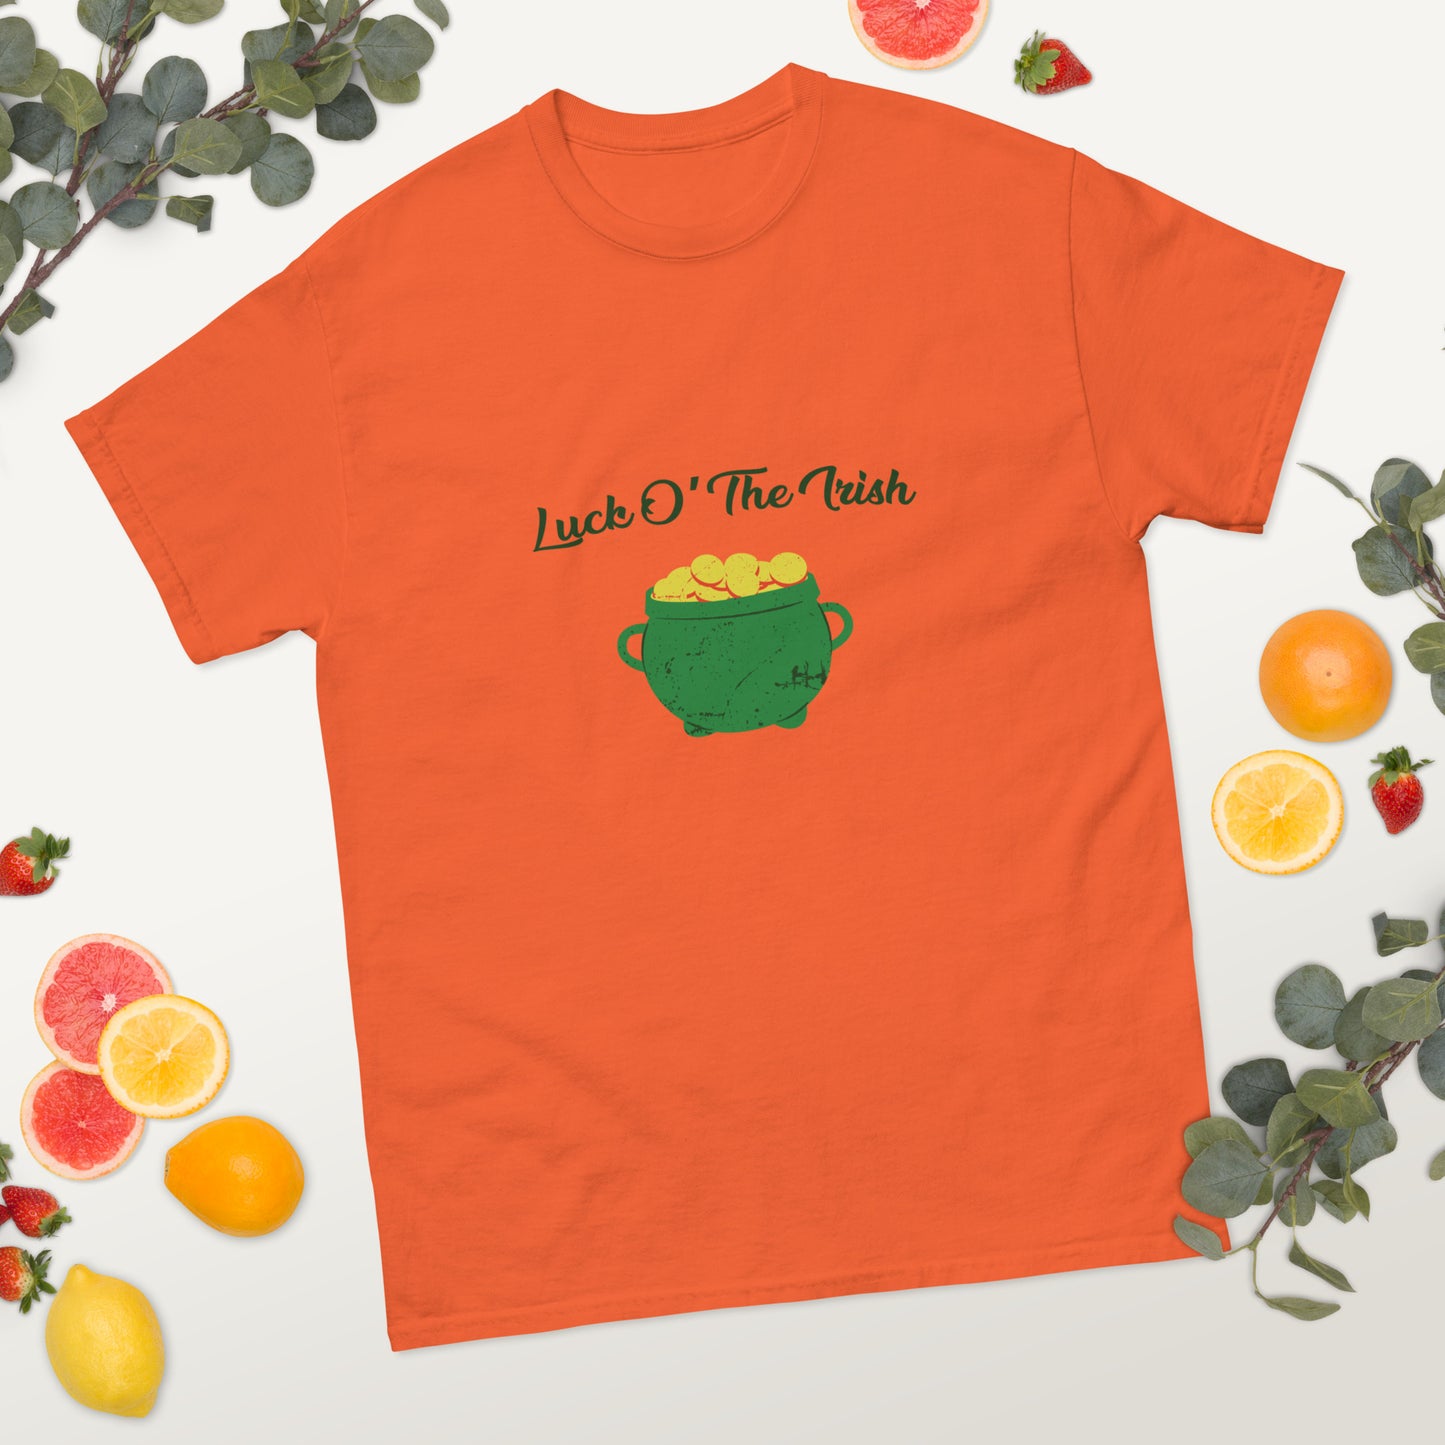 "Luck O’ The Irish" Men’s T-Shirt - Weave Got Gifts - Unique Gifts You Won’t Find Anywhere Else!